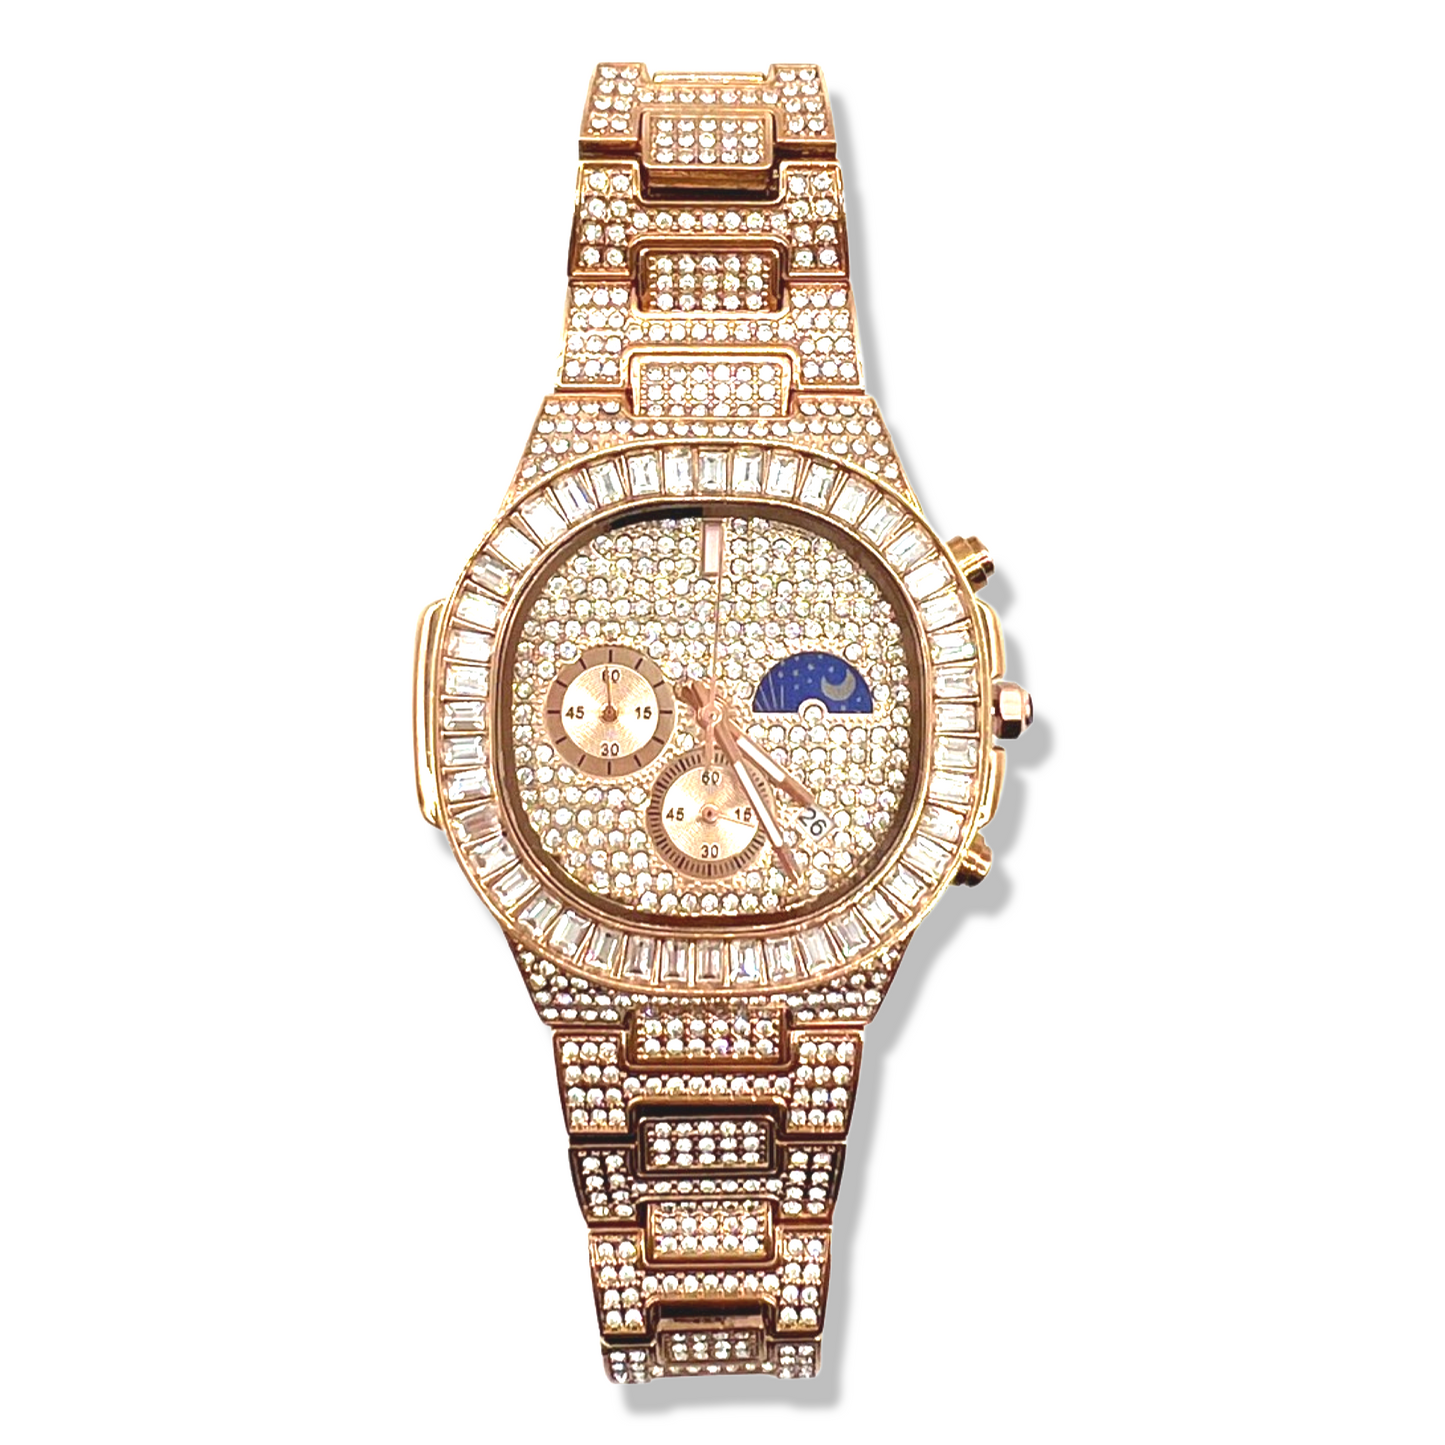 Scarabeaus OVAL SHAPE  STYLE ICED OUT WATCH